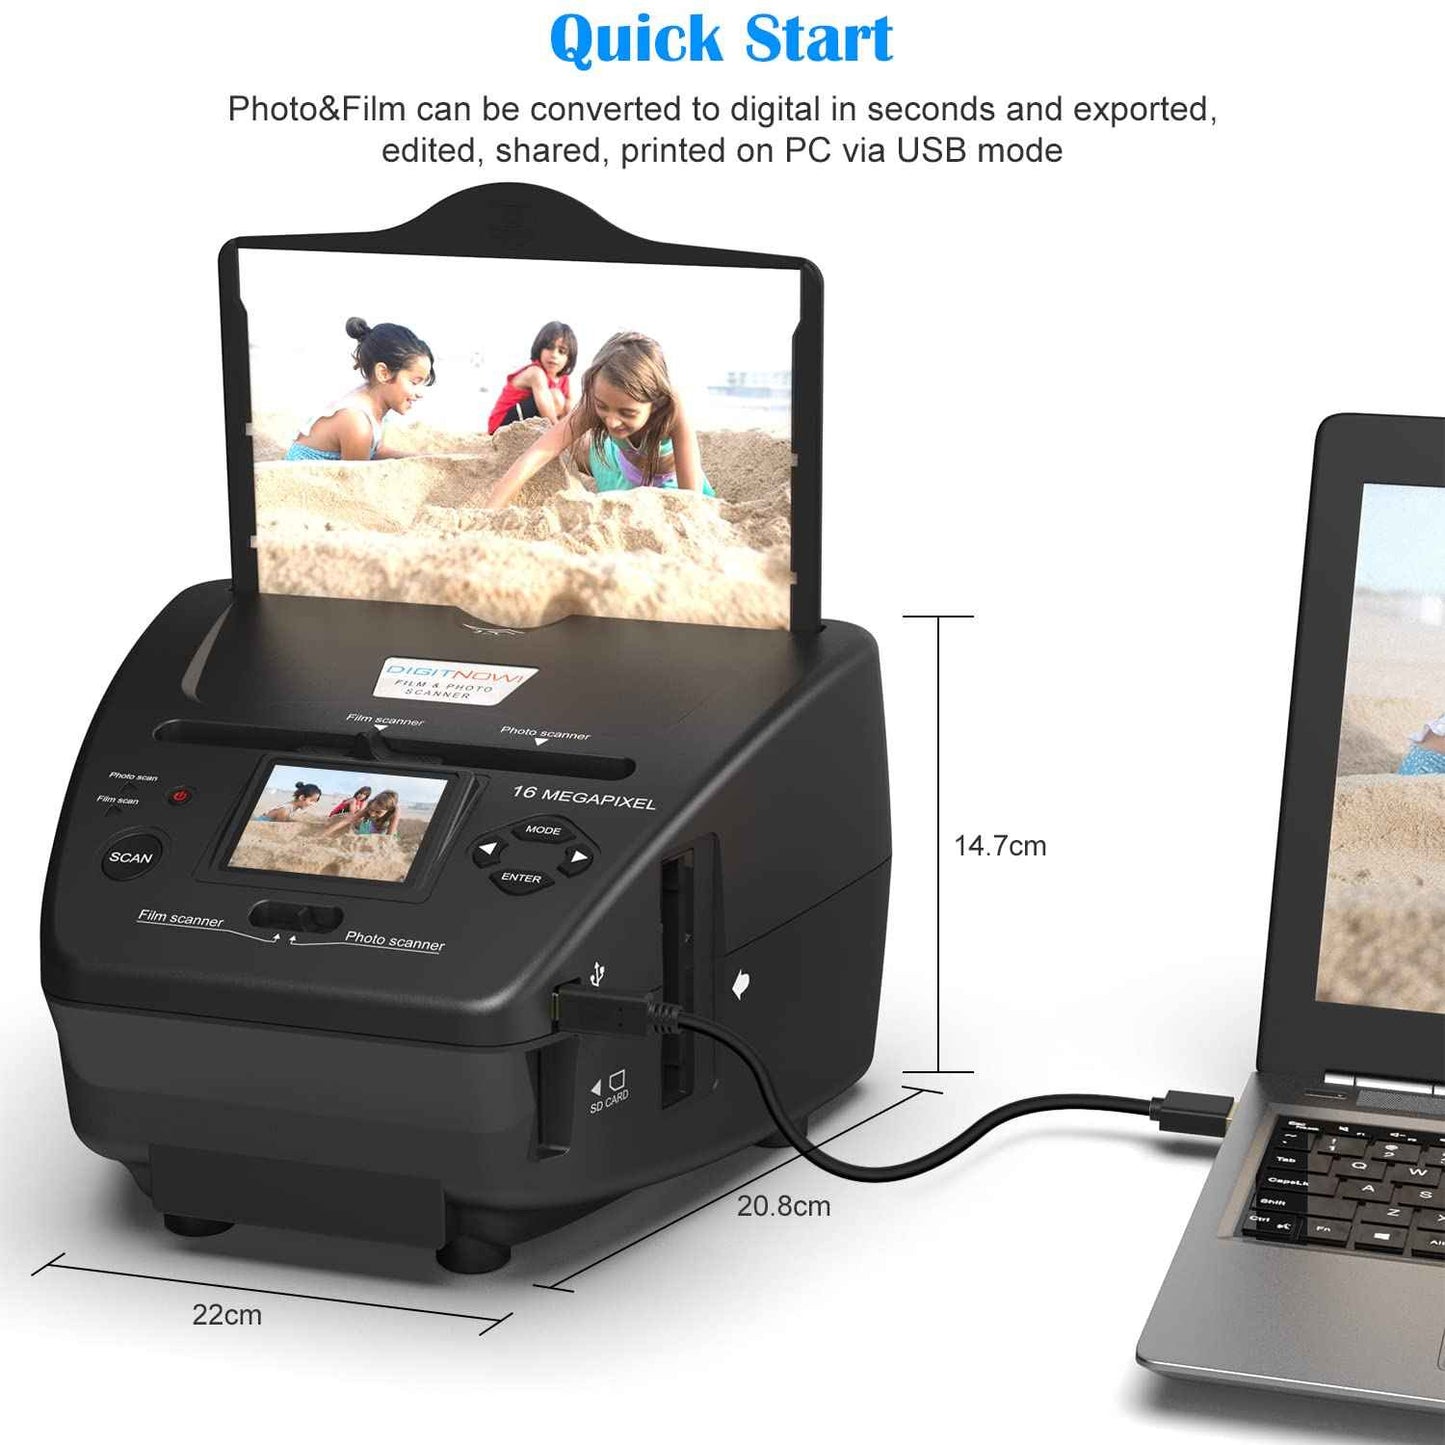 4-in-1 Film & Photo Scanner with 2.4" LCD Screen